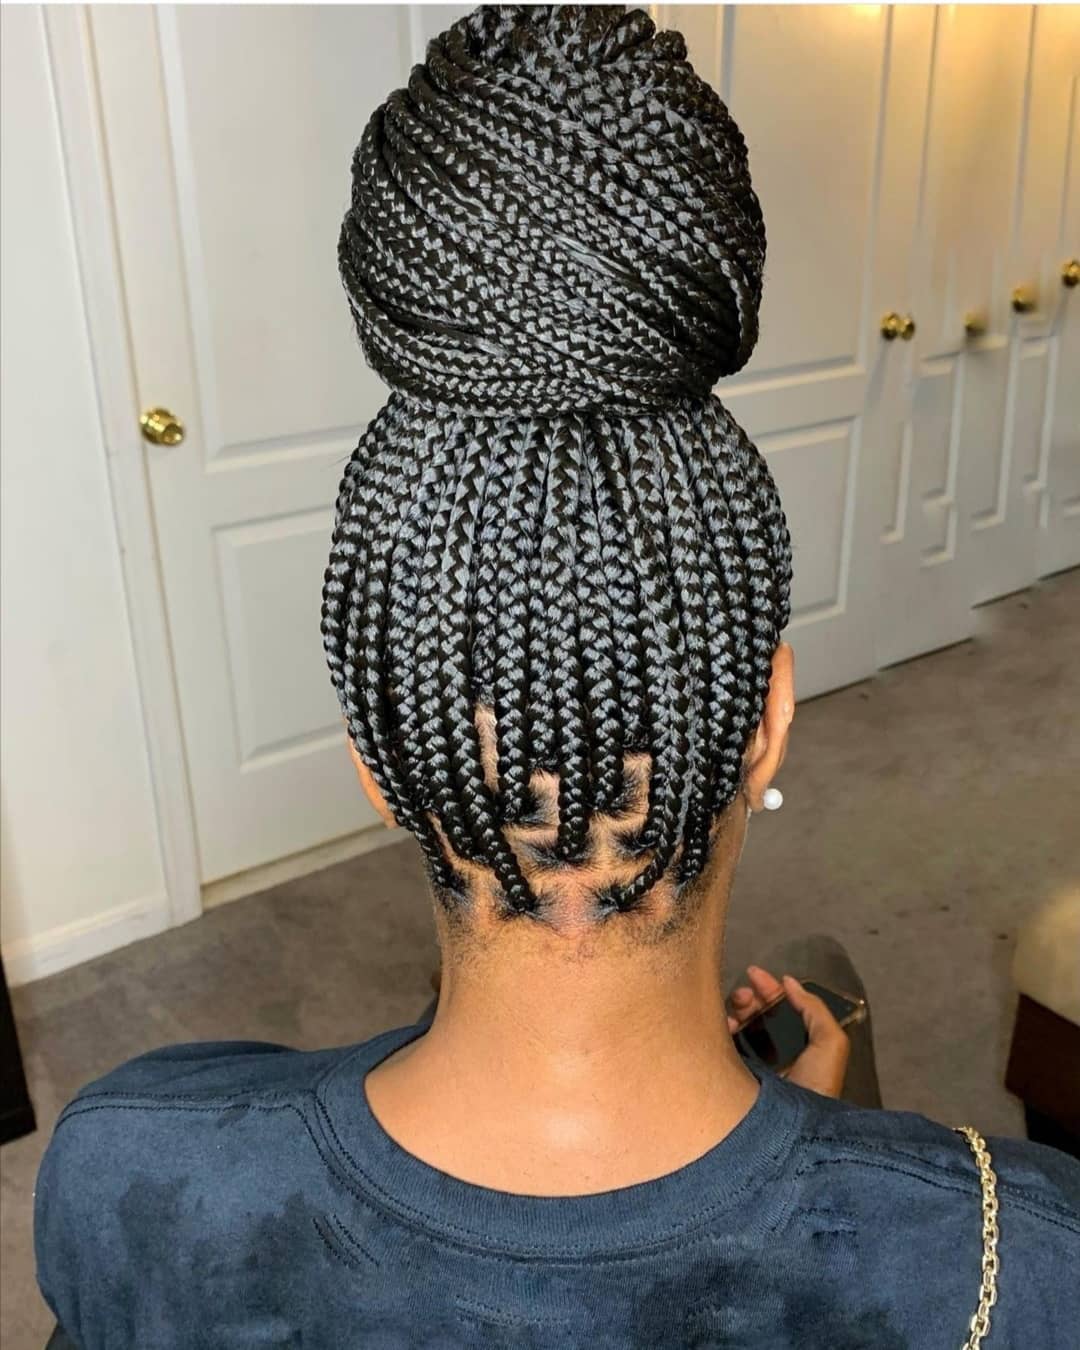 65 Photos: Braided Hairstyles That Will Make You Feel Comfortable